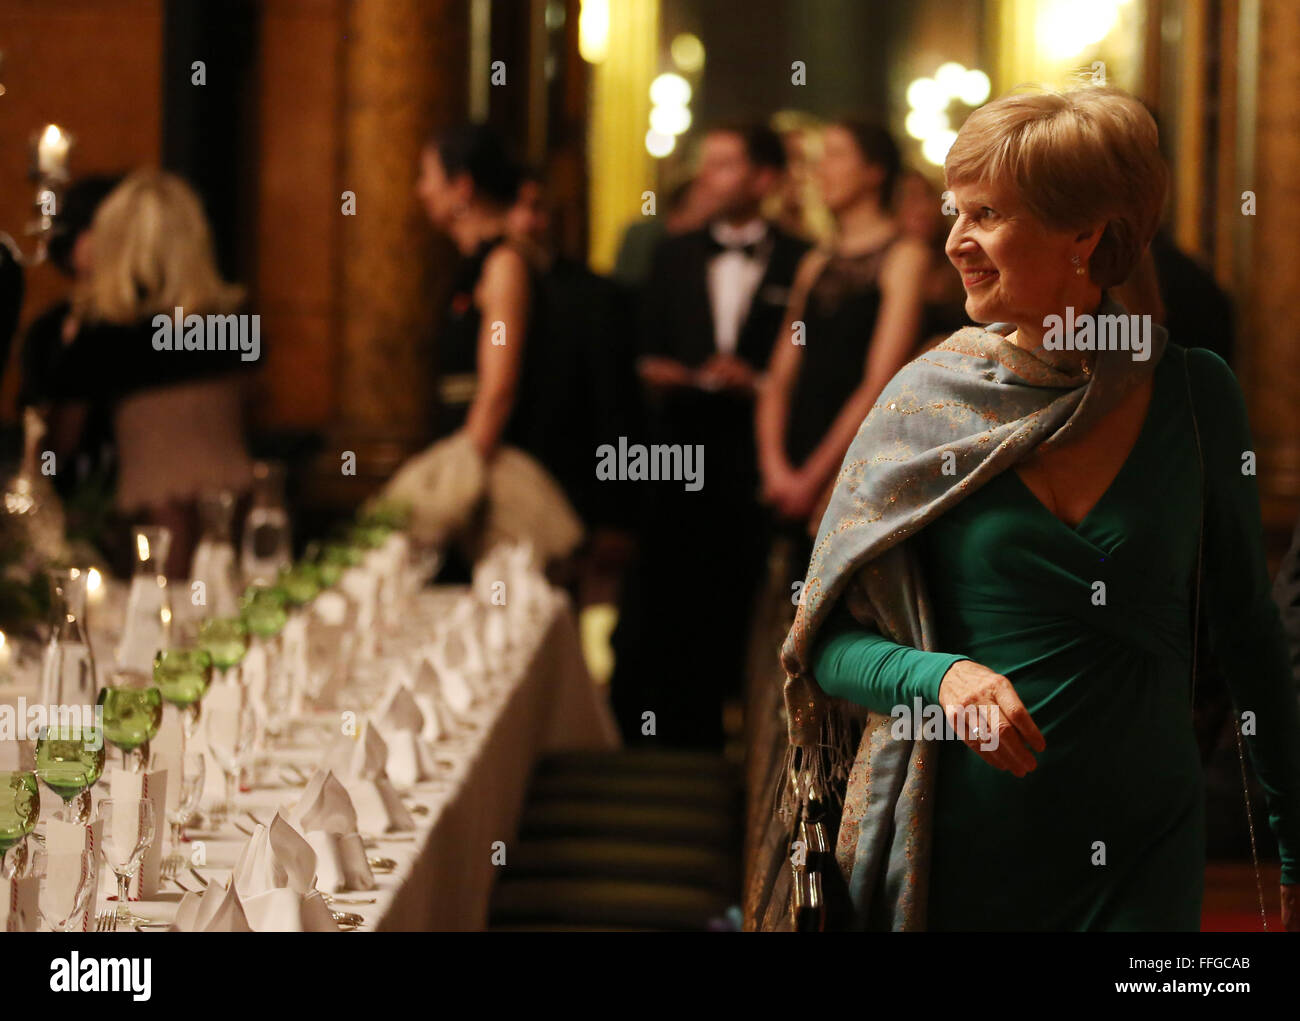 Hamburg, Germany. 12th Feb, 2016. Friede Springer (R), German publisher and widow of Axel Springer, arrives to the Matthiae dinner at the city hall of Hamburg, Germany, 12 February 2016. Britain's Prime Minister David Cameron and German Chancellor Angela Merkel are guests of honour at the oldest feast in the world. Since 1356, the leaders of the Hansa city invite distinguished guests to the Matthiae dinner. Photo: CHRISTIAN CHARISIUS/dpa/Alamy Live News Stock Photo